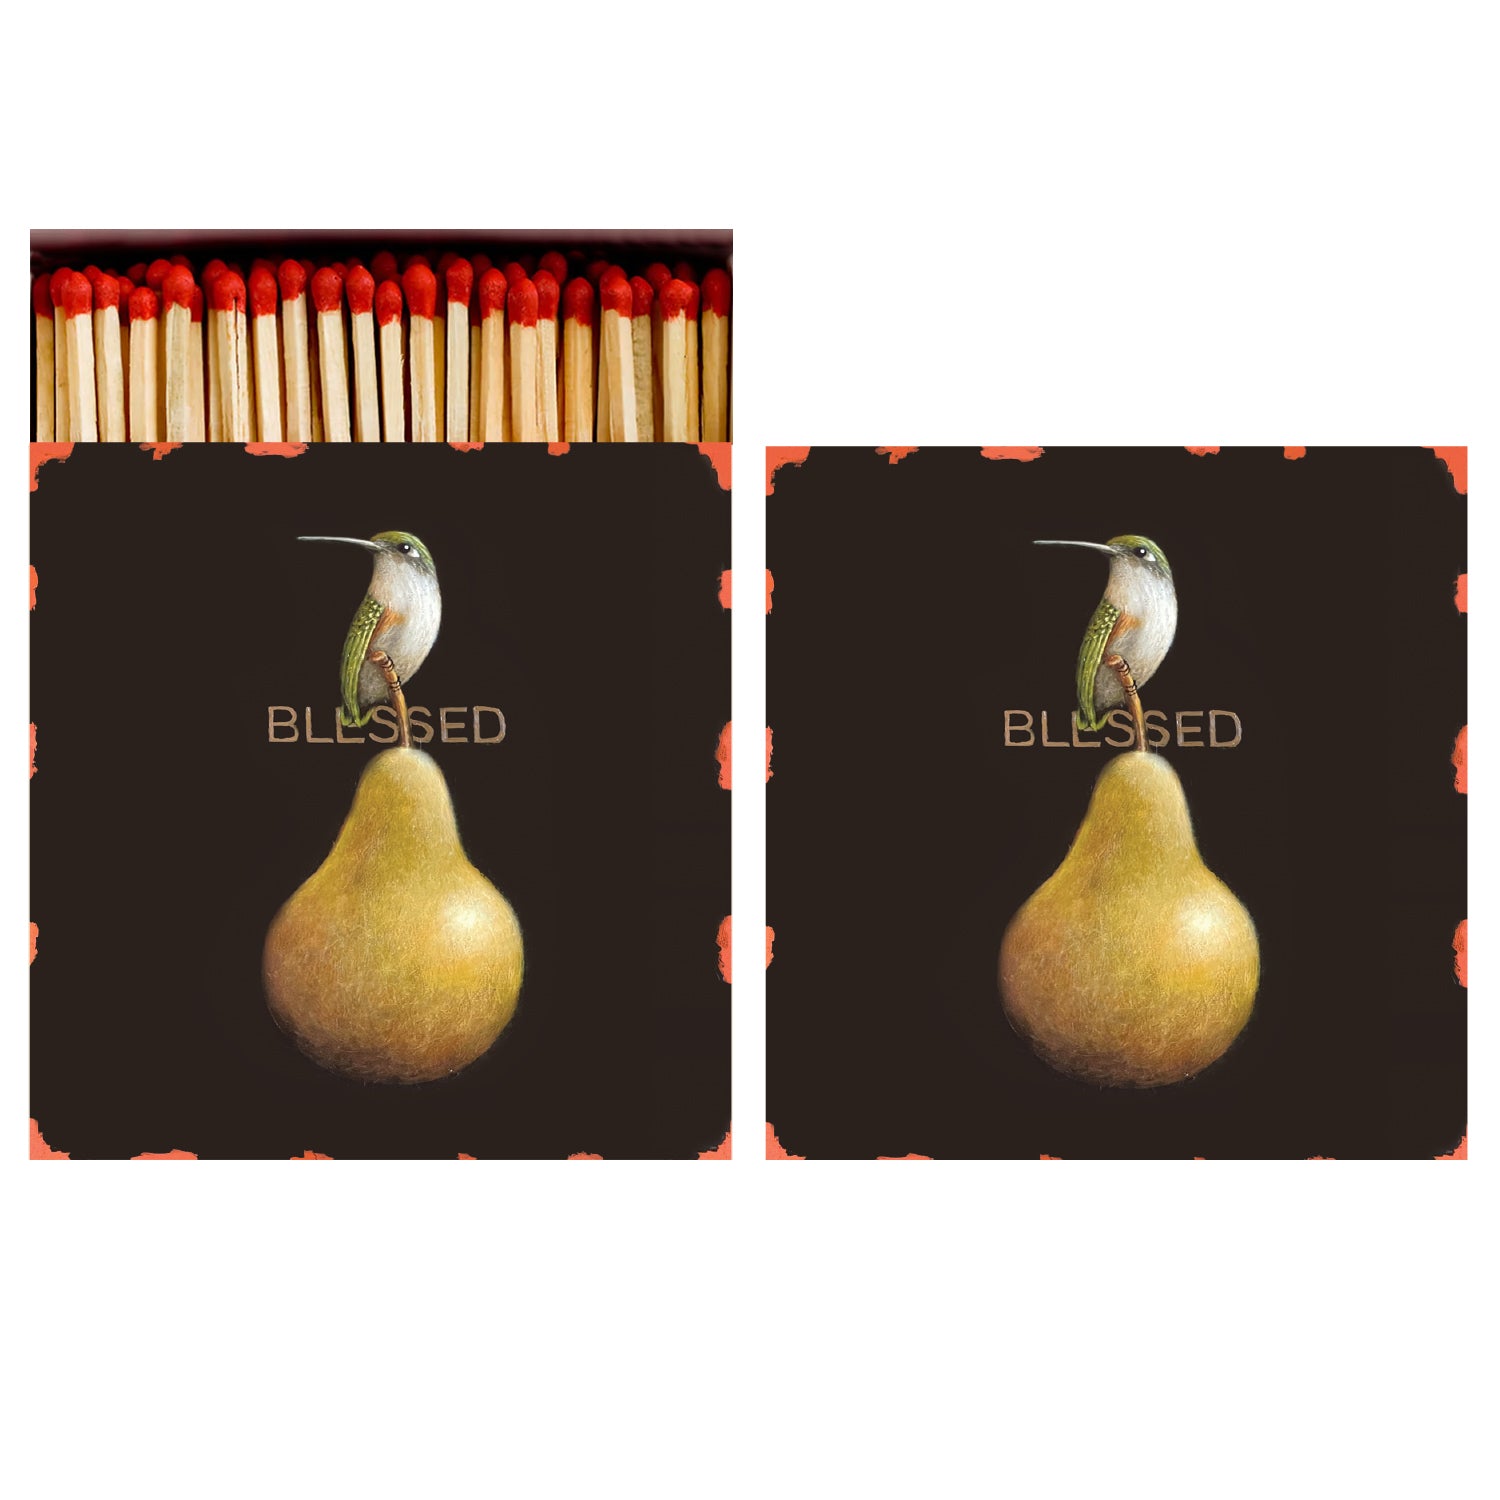 Two identical sides of a square match box, the left of which is open slightly to reveal the matches inside. The artwork on the box is an illustration of a yellow pear with a green and white hummingbirds perched on the stem, and the word &quot;BLESSED&quot; in gold against the dark brown background.